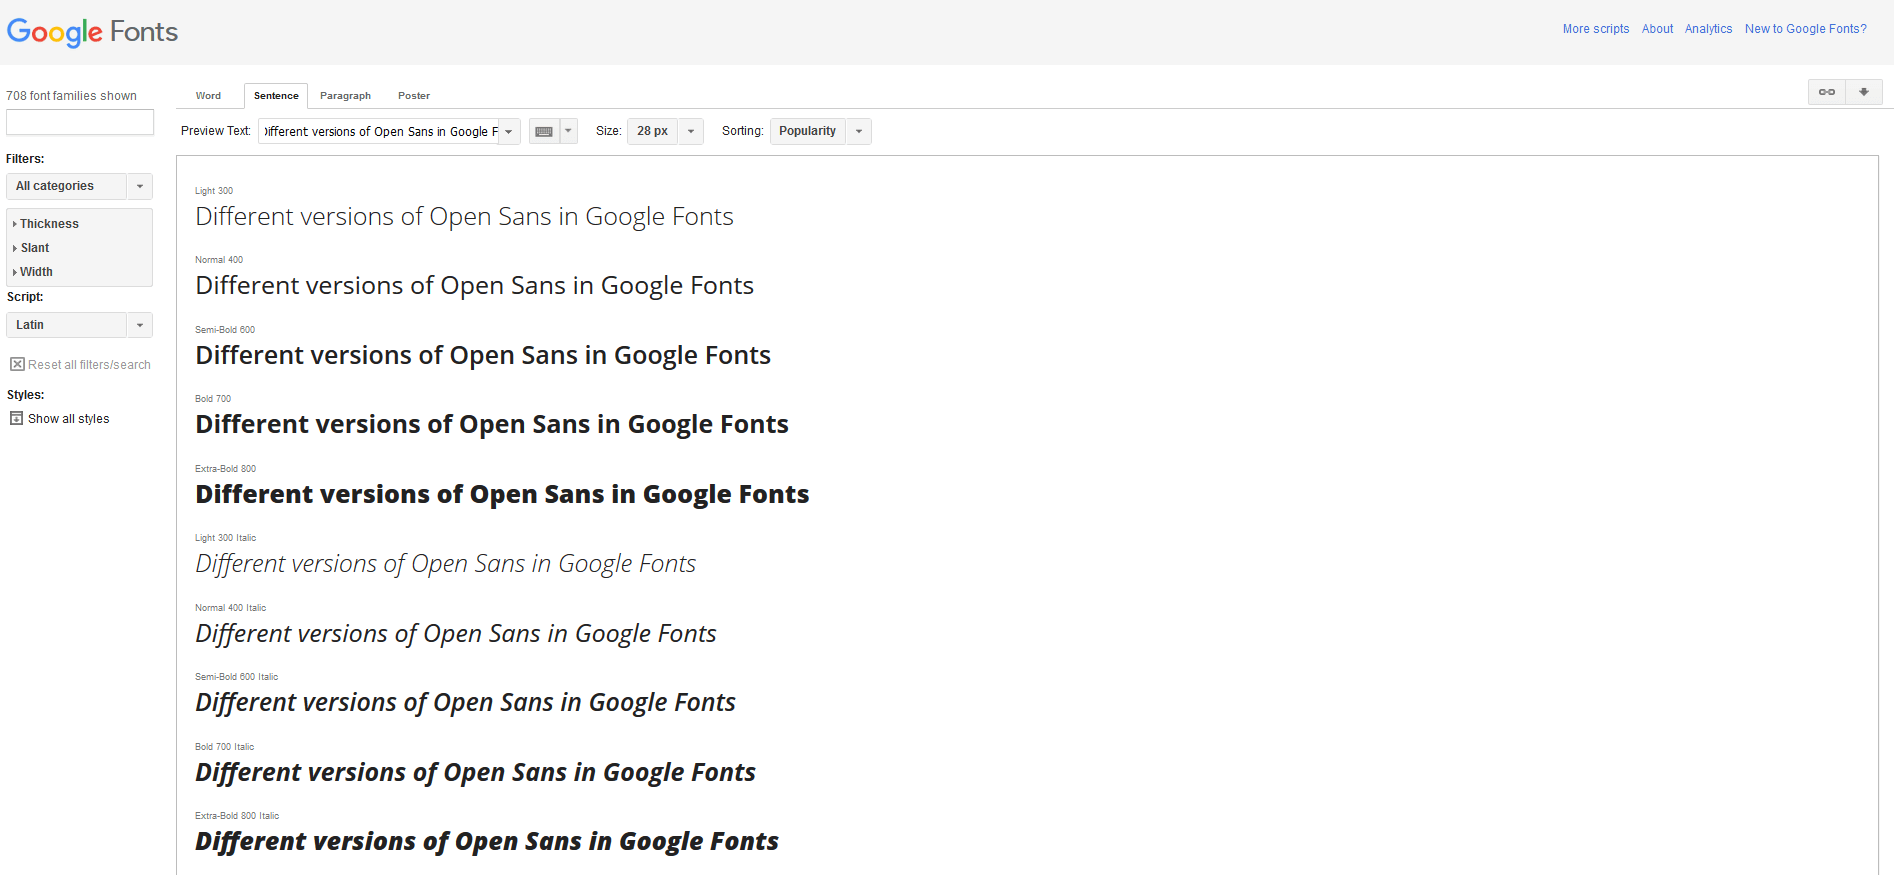 Different versions of Open Sans in Google Fonts